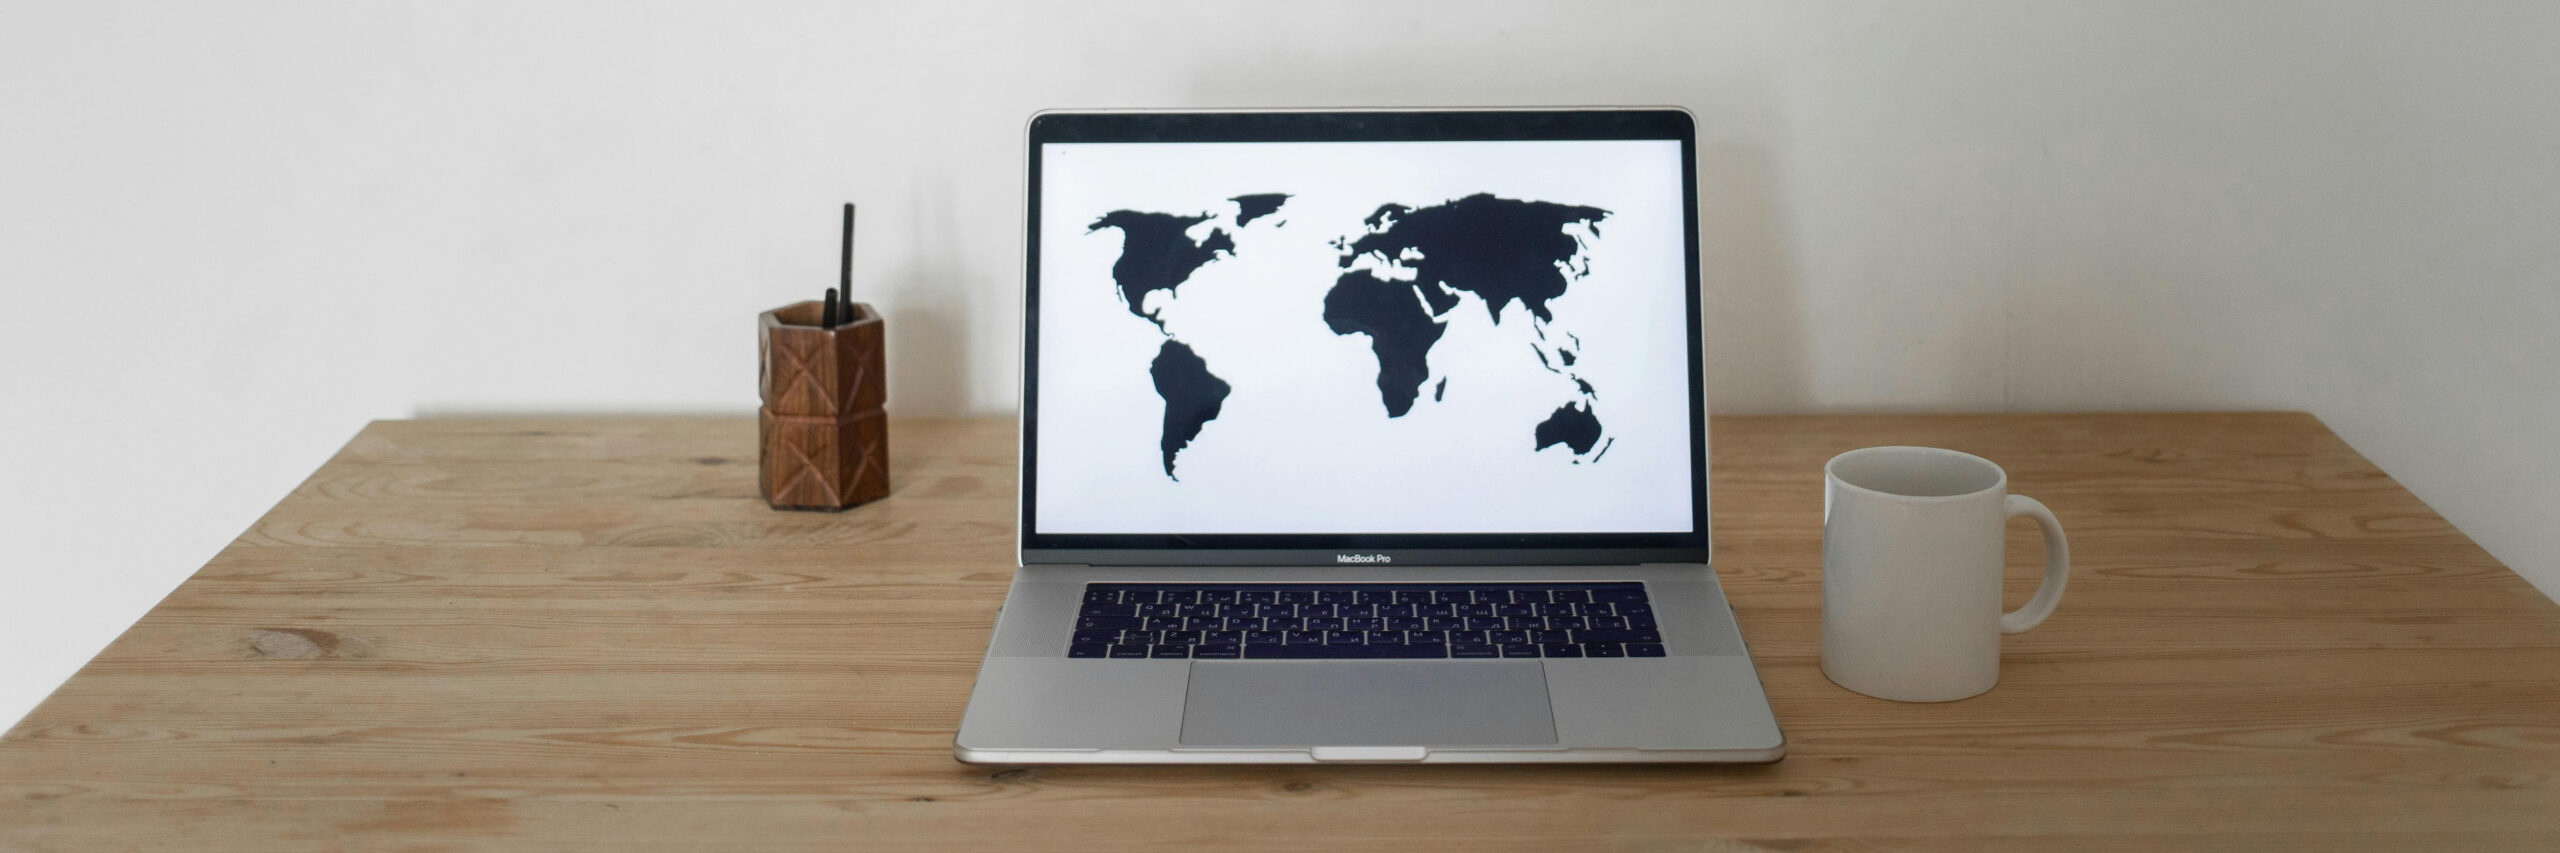 image of the world on laptop BANNER